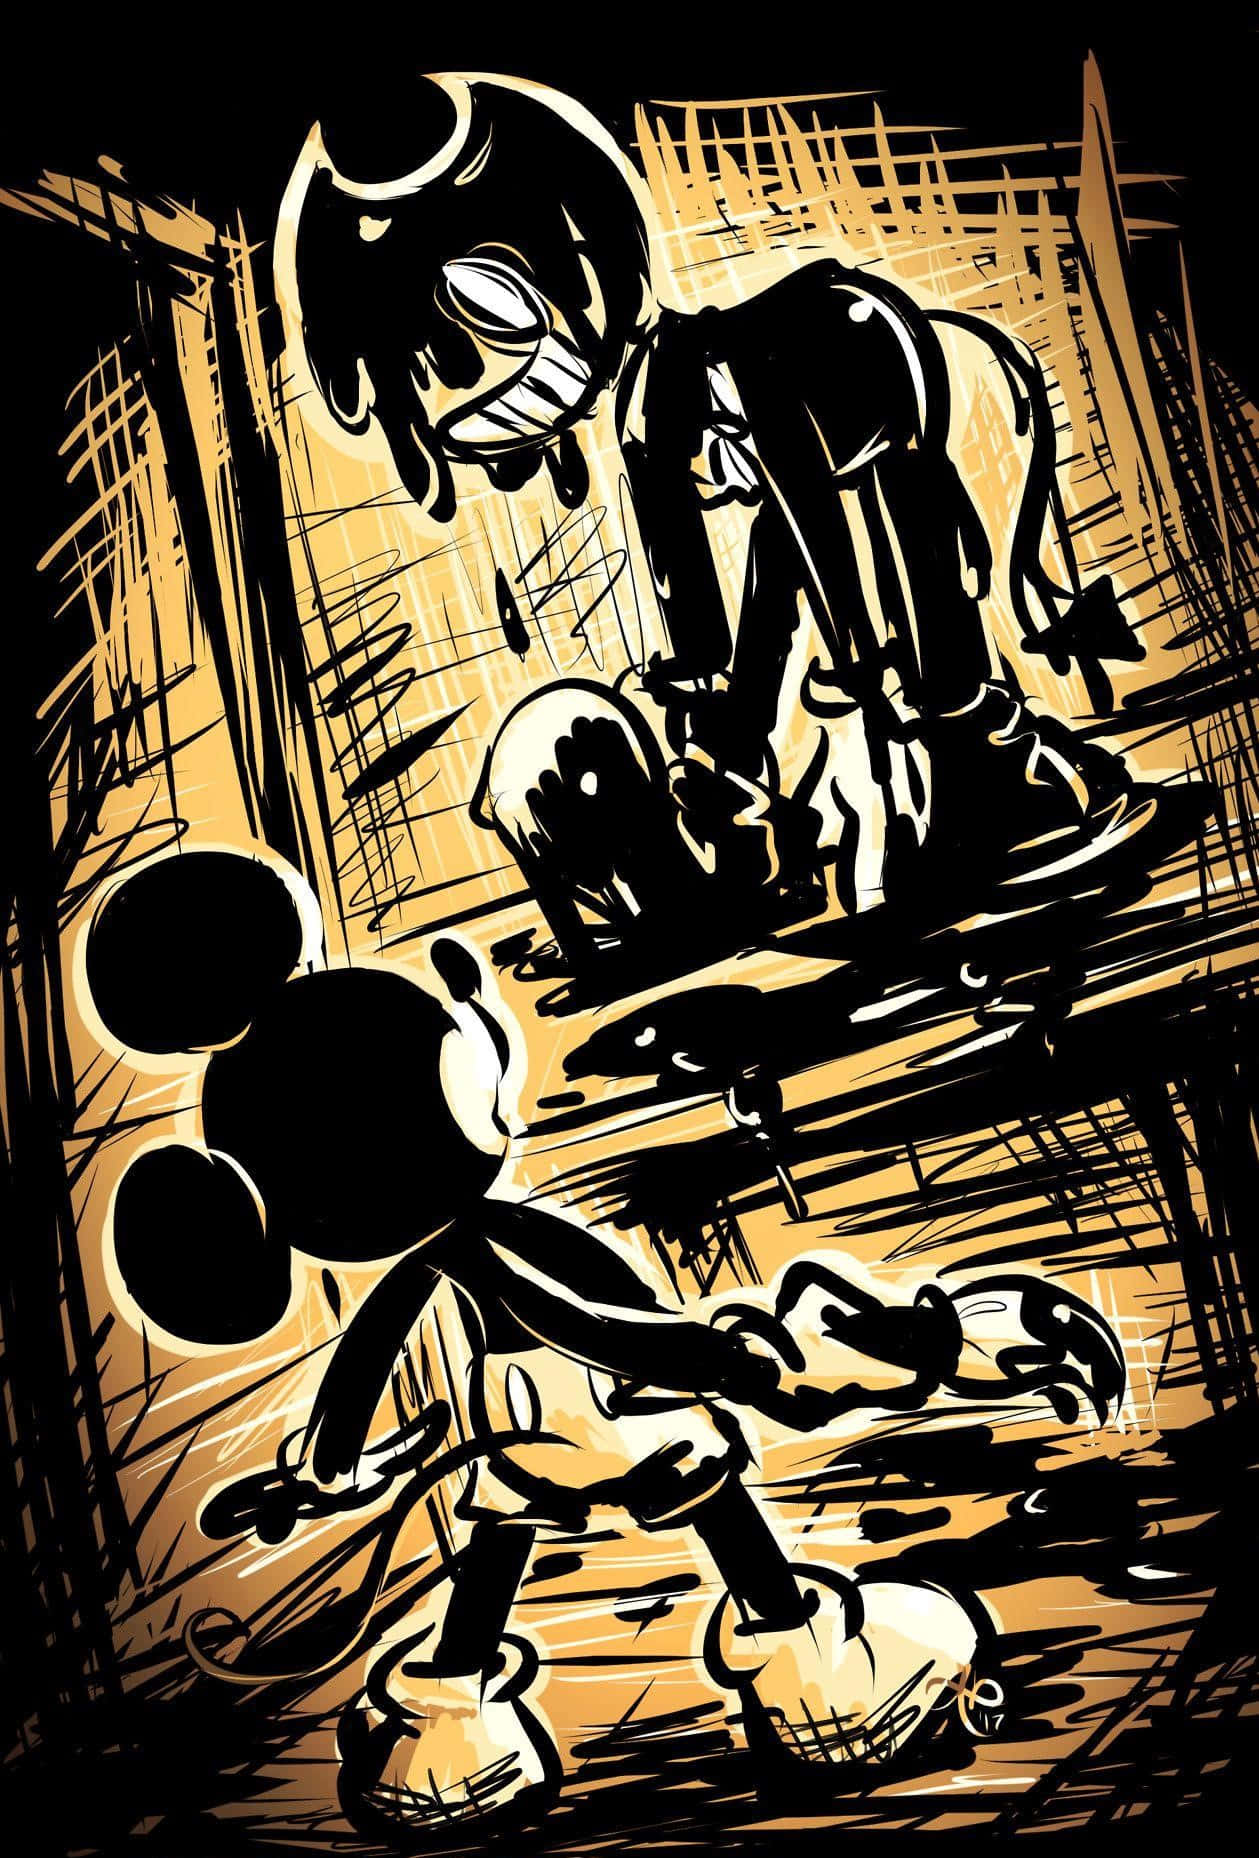 Bendy the Ink Demon strikes a pose against a retro-styled ink factory background. Wallpaper